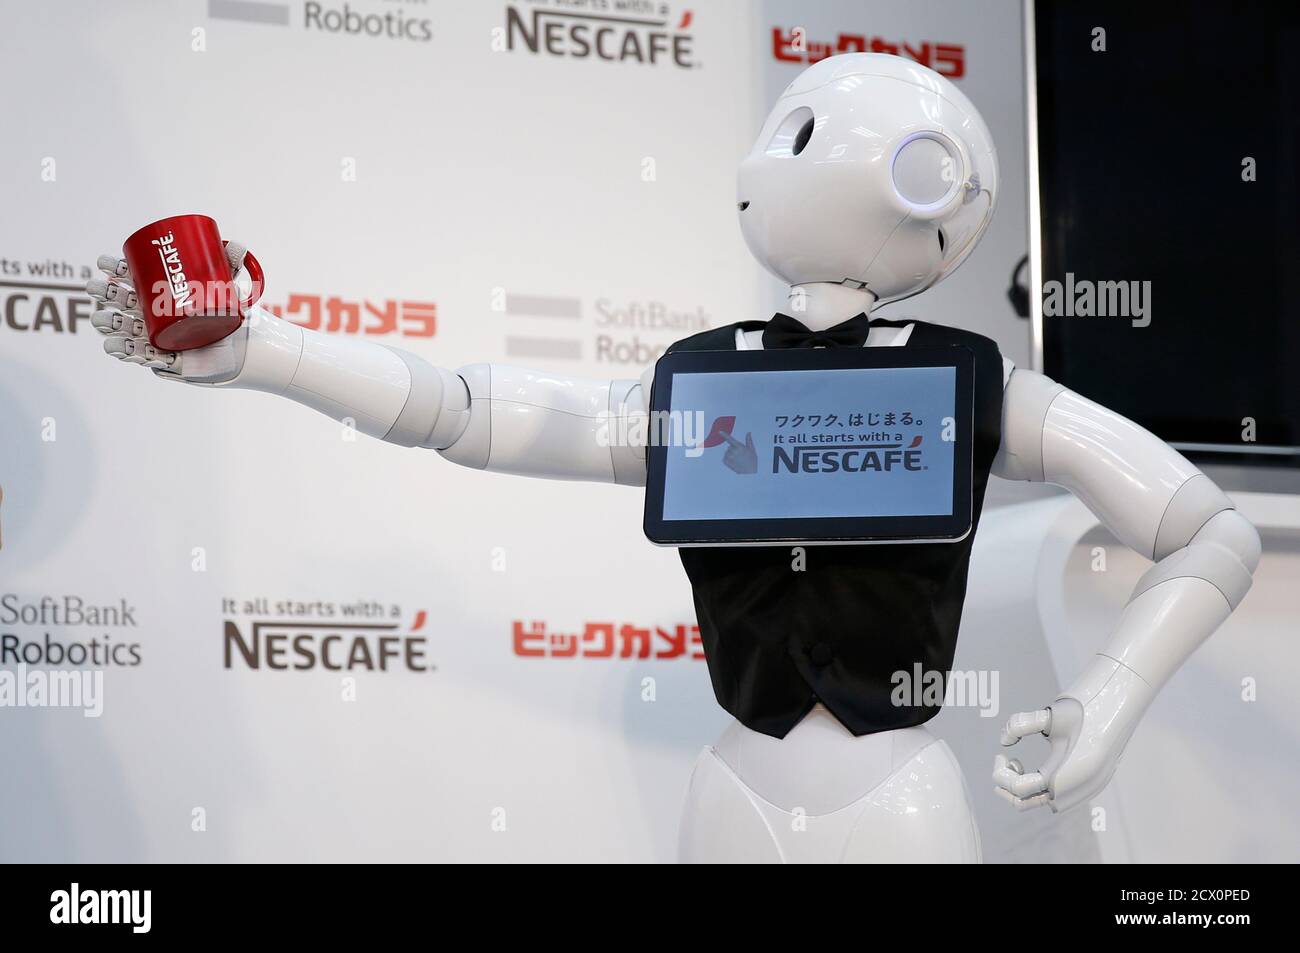 SoftBank Corp's human-like robot named "Pepper" introduces Nestle's coffee  machines during a promotion event at an electronics shop in Tokyo December  1, 2014. Nestle SA started to use robots to help sell